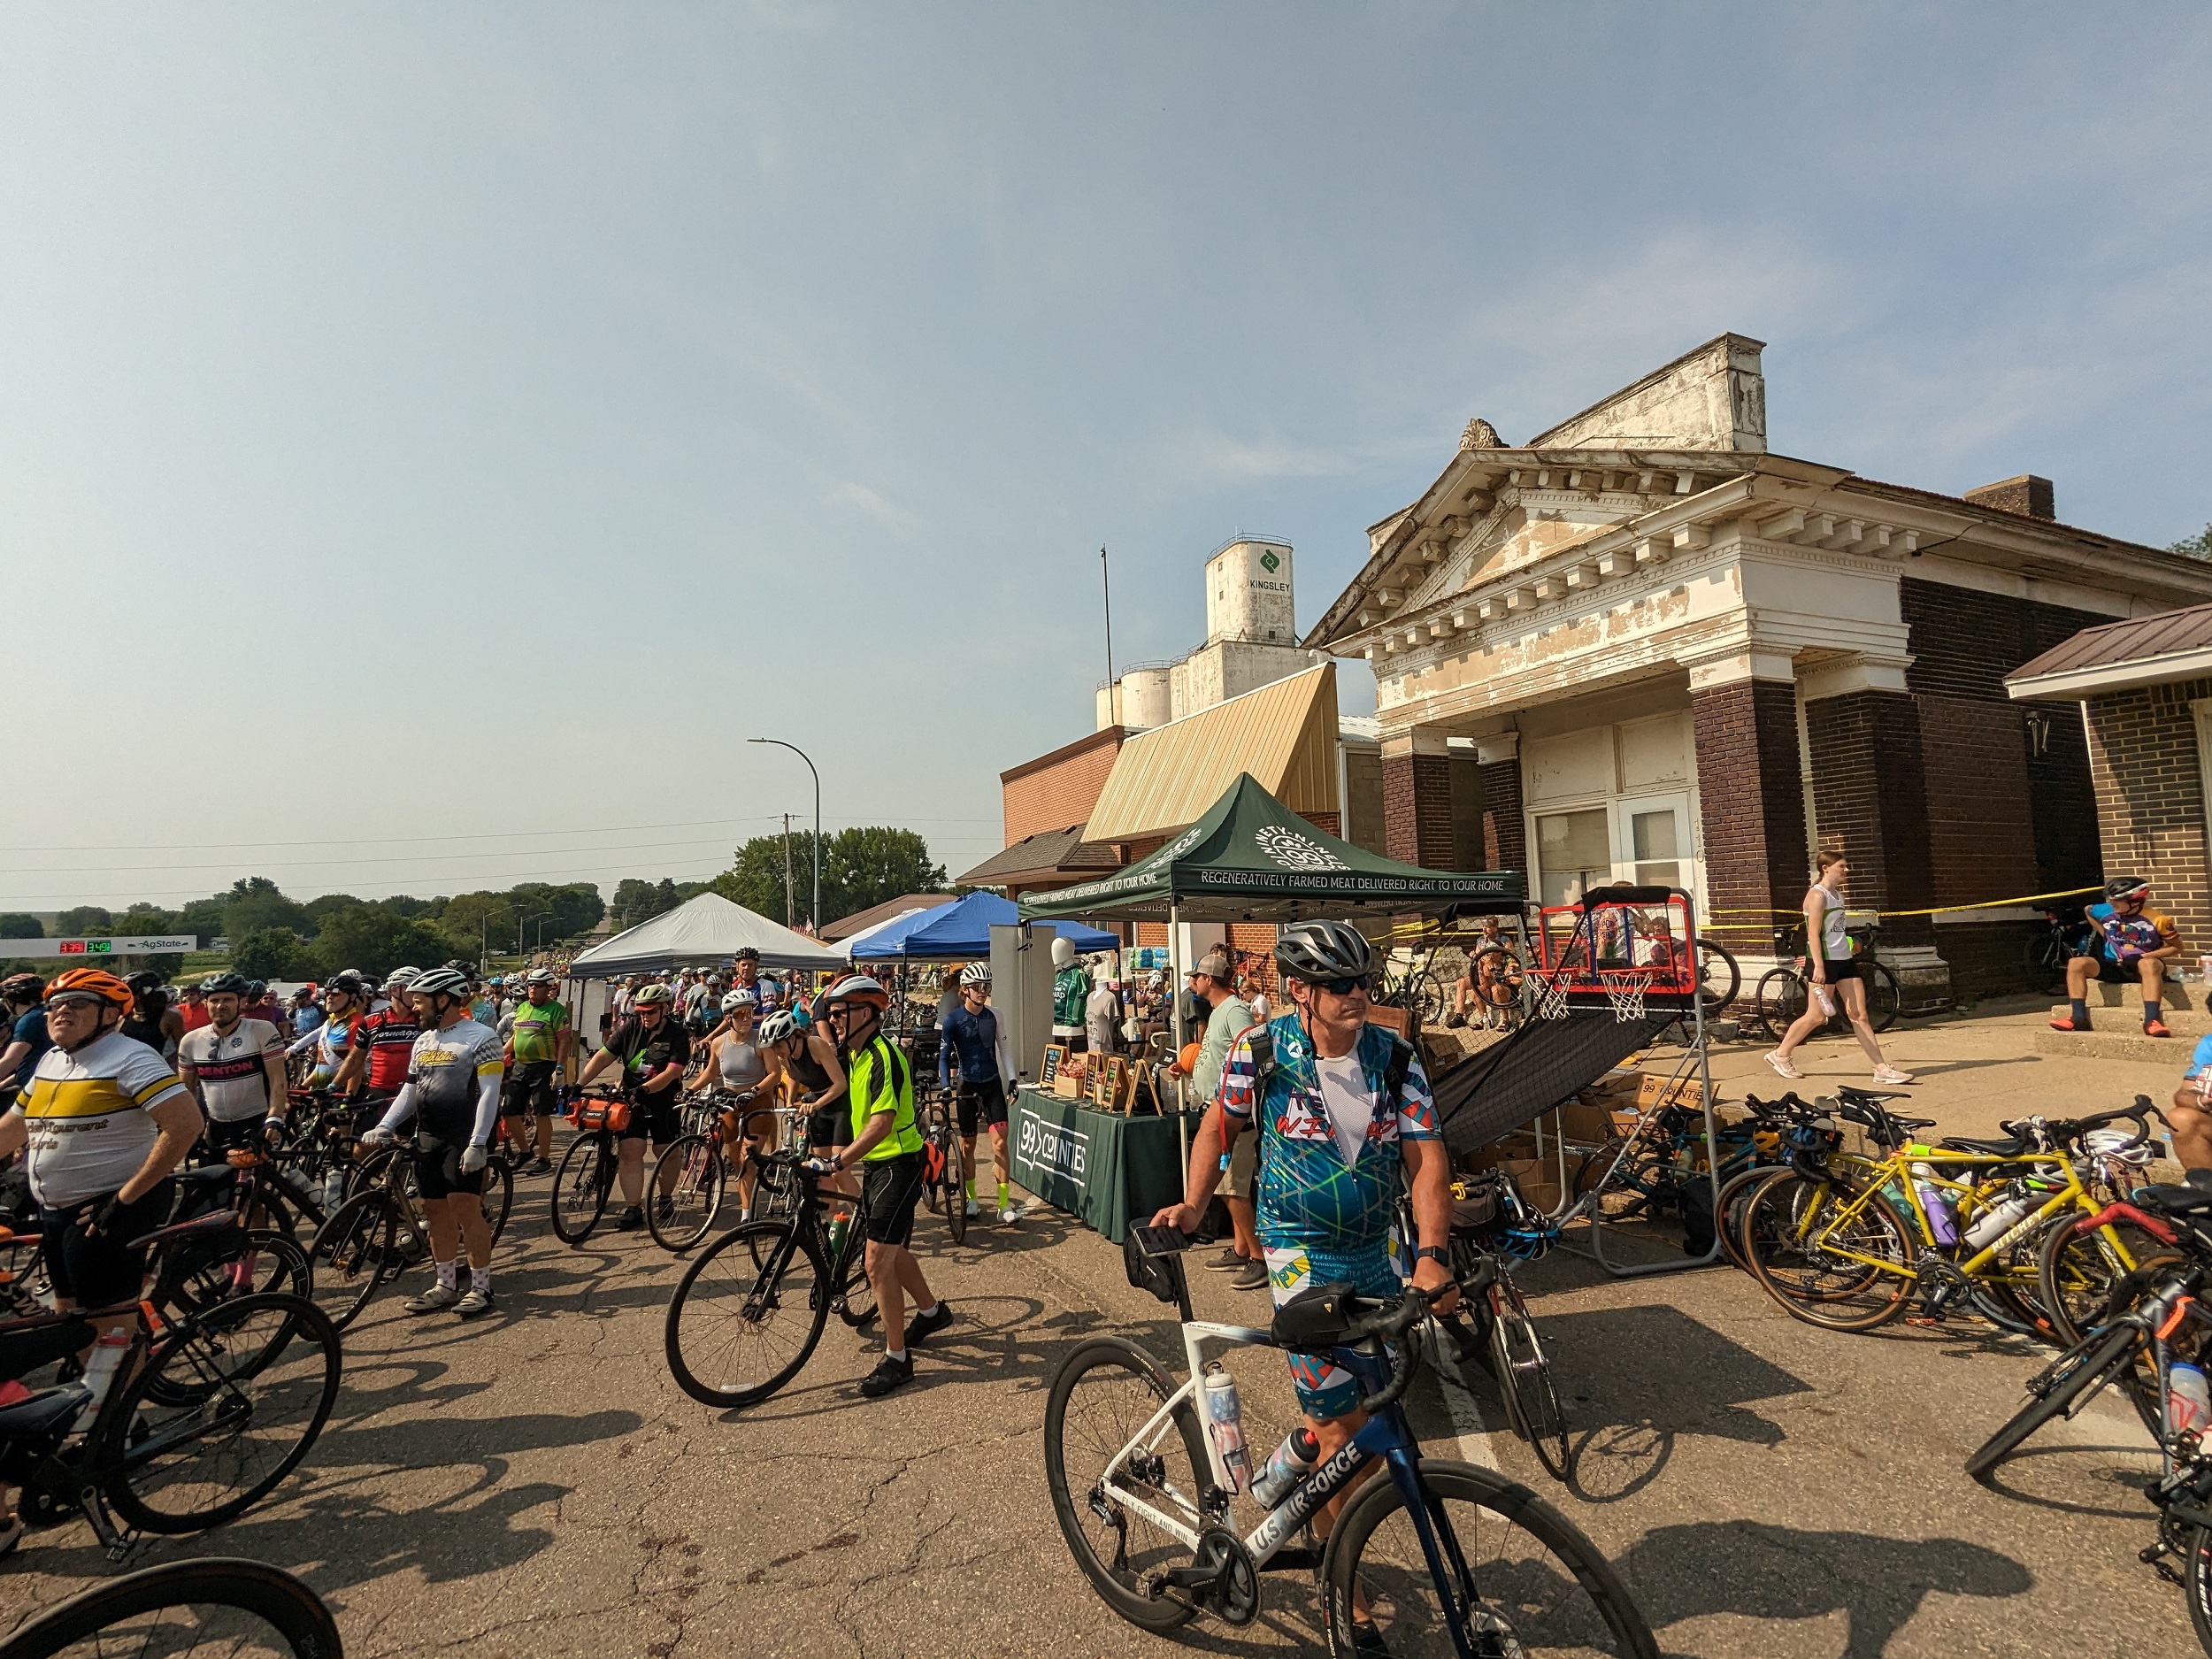 Crowd of walking cyclists with a classical revival one story and white grain elevator.